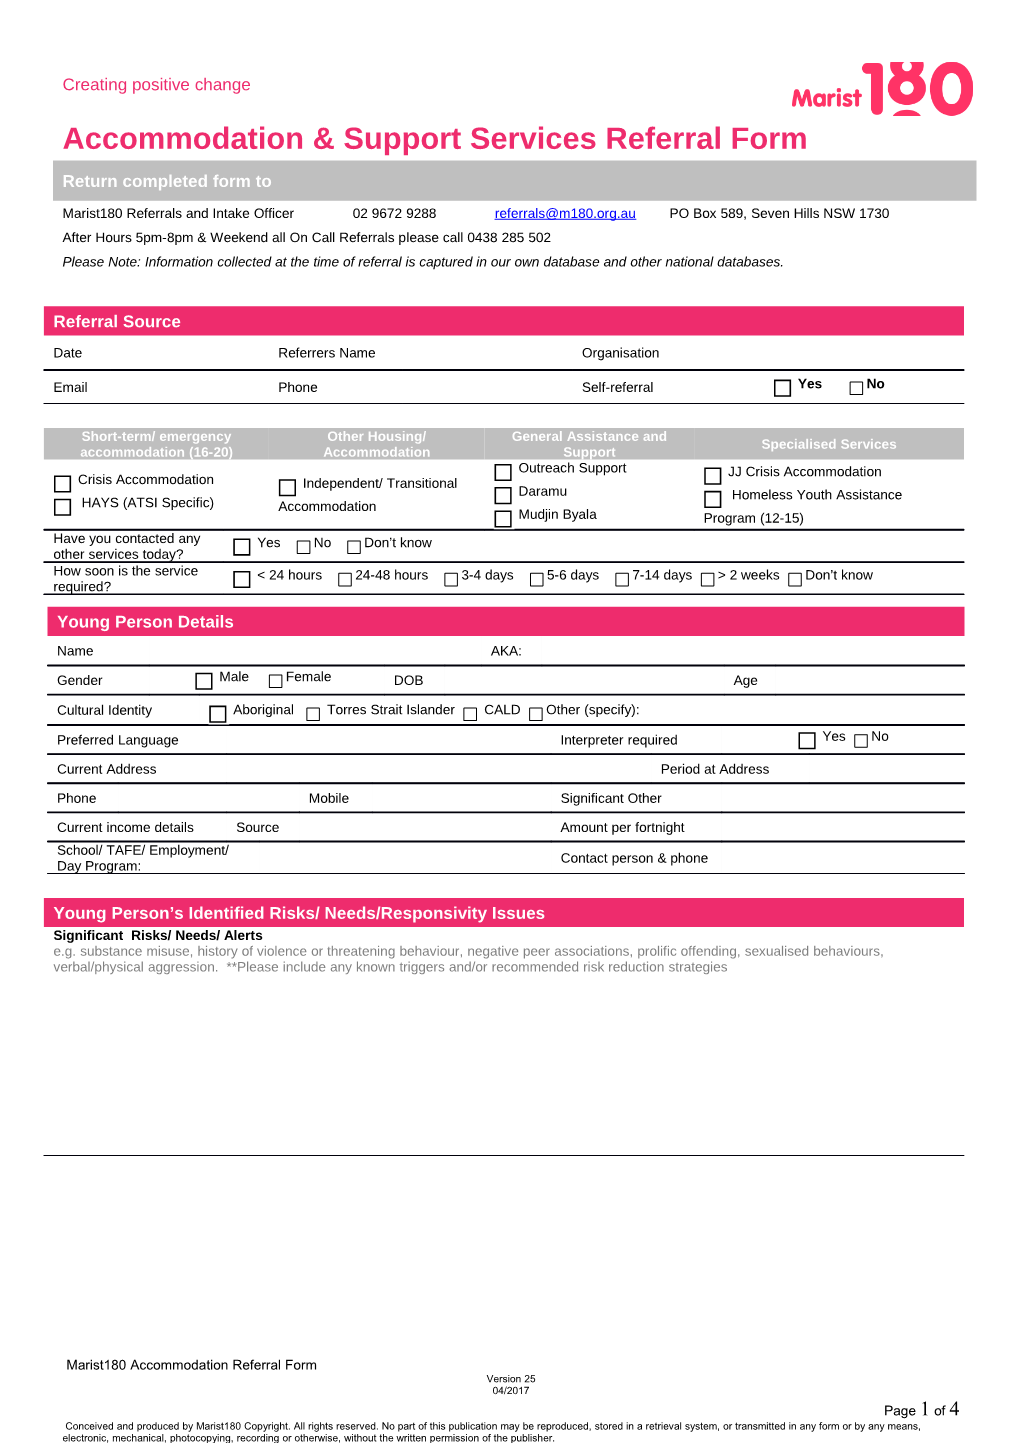 Nepean Divisional Referral Form